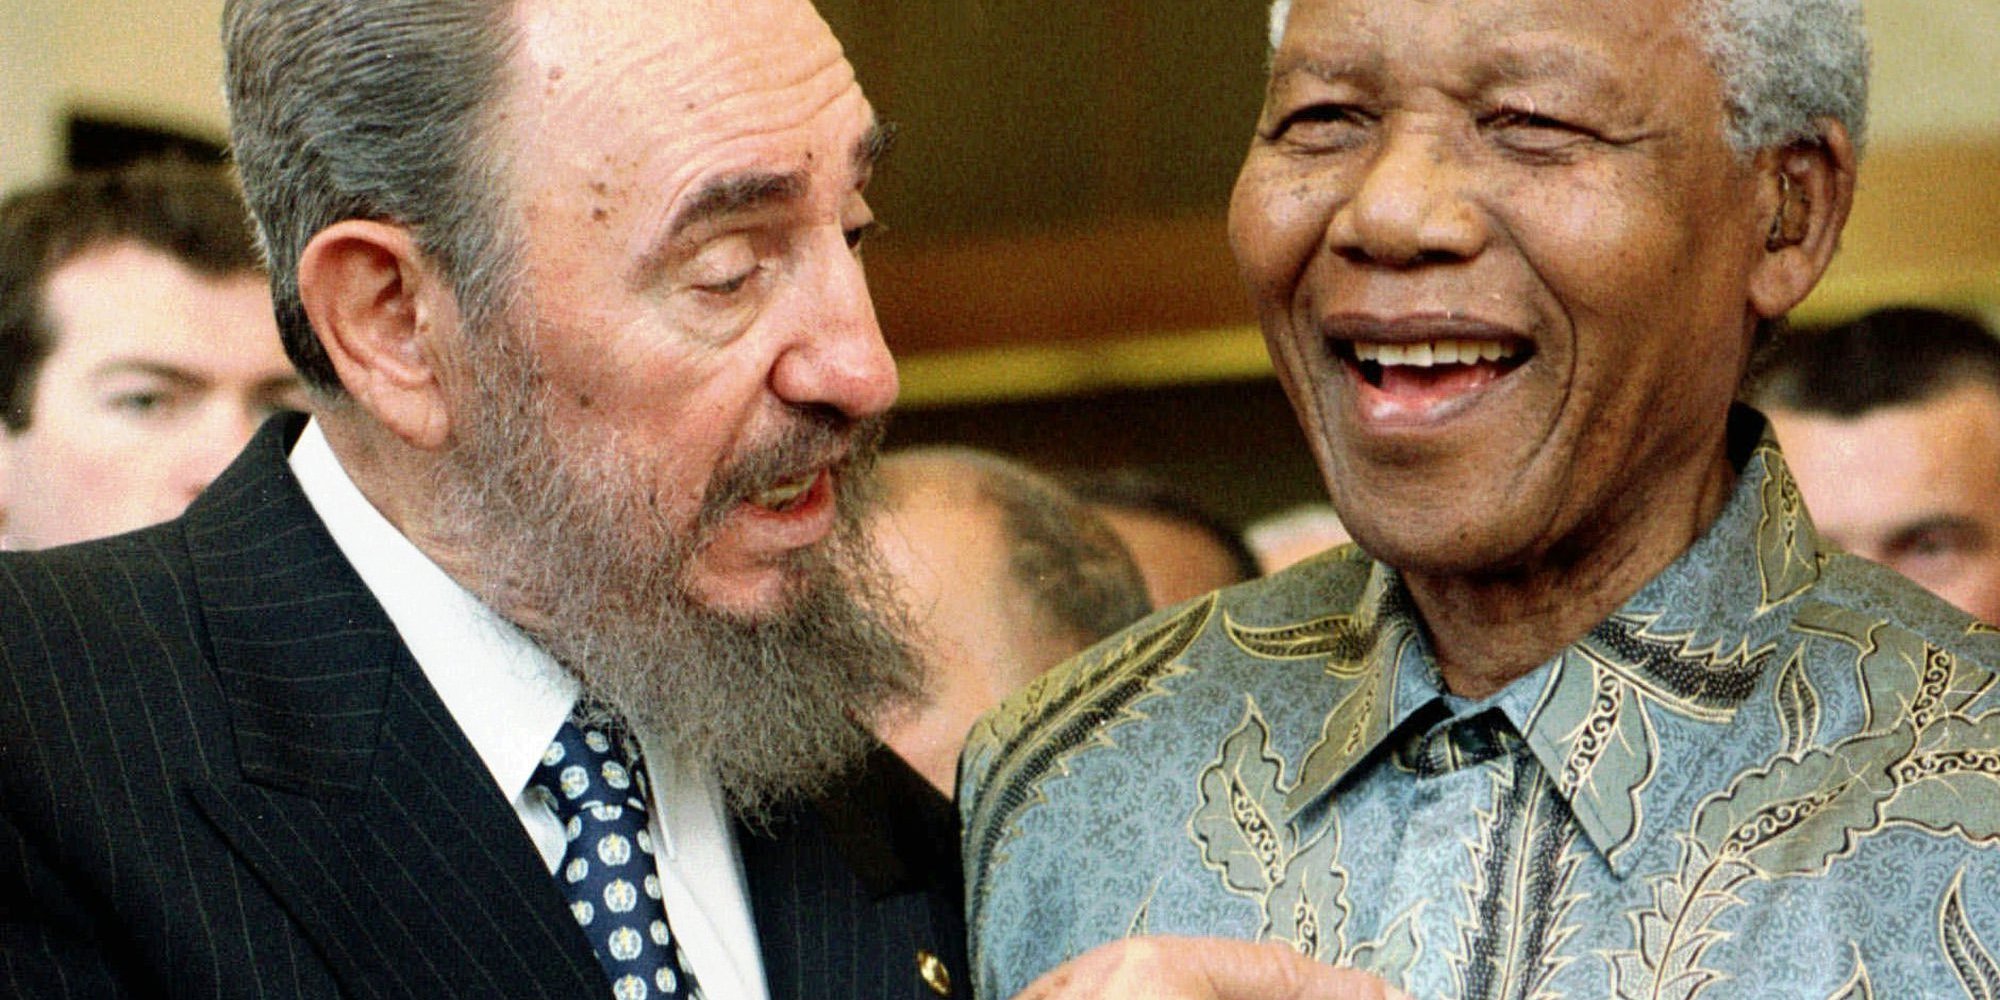 Cuban leader Fidel Castro, left, shares a laugh with South Africa President Nelson Mandela at the World Trade Organization held in Geneva Tuesday, May 19, 1998. Mandela and Castro said in separate speeches that the global trading system had failed to achieve its goals of bringing a higher standard of living to many developing countries. (AP Photo/PATRICK AVIOLAT)